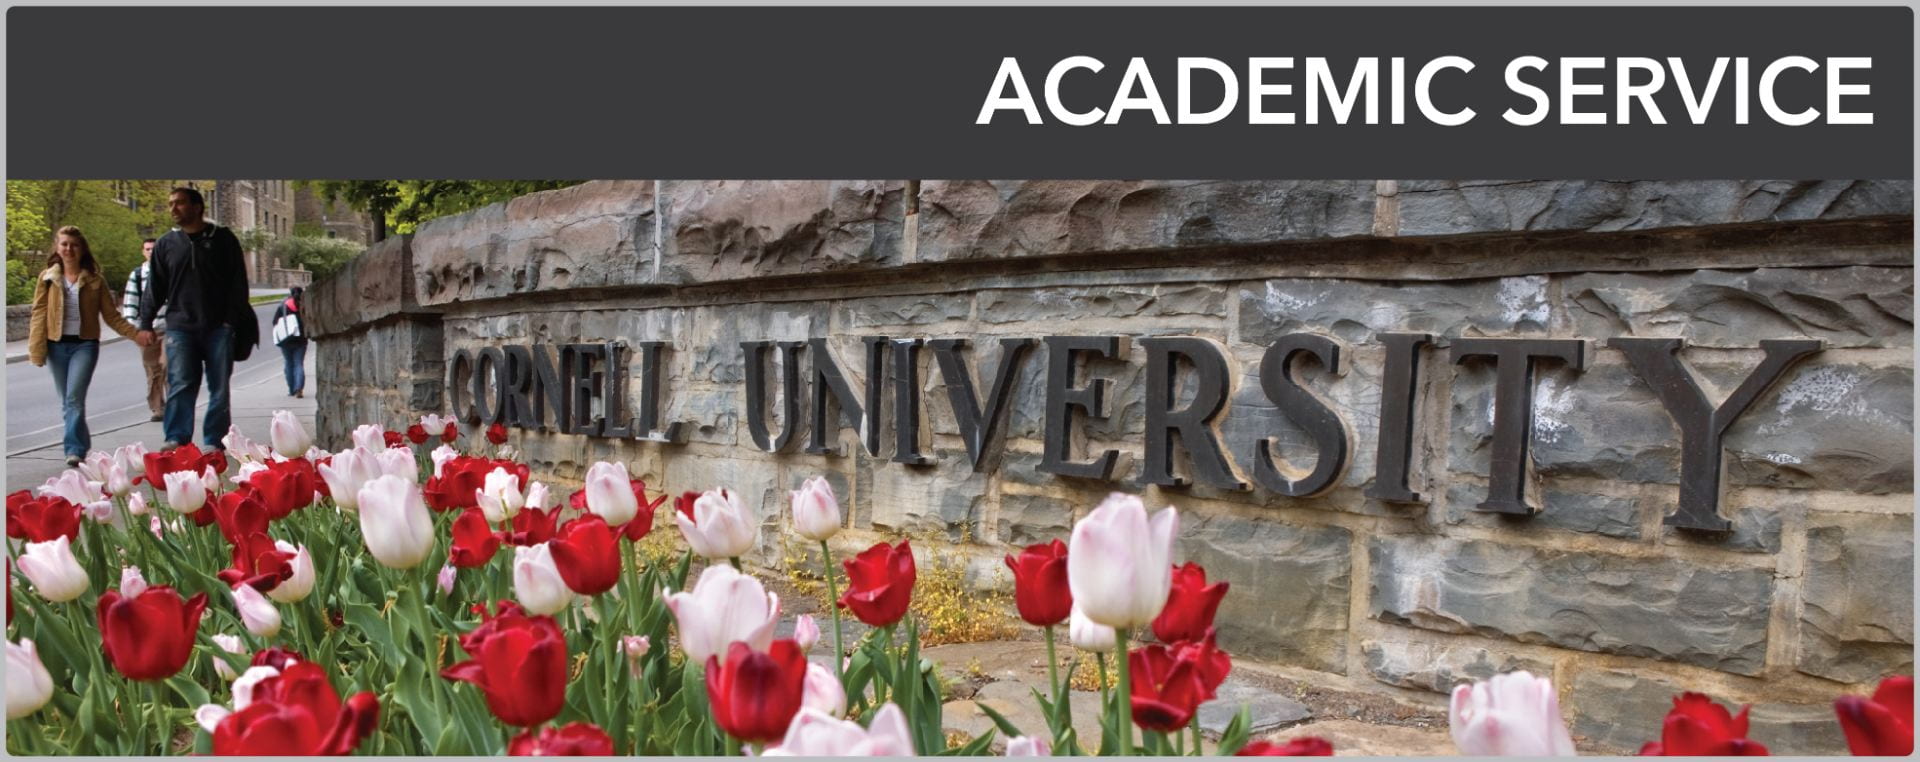 Academic service banner with link to page